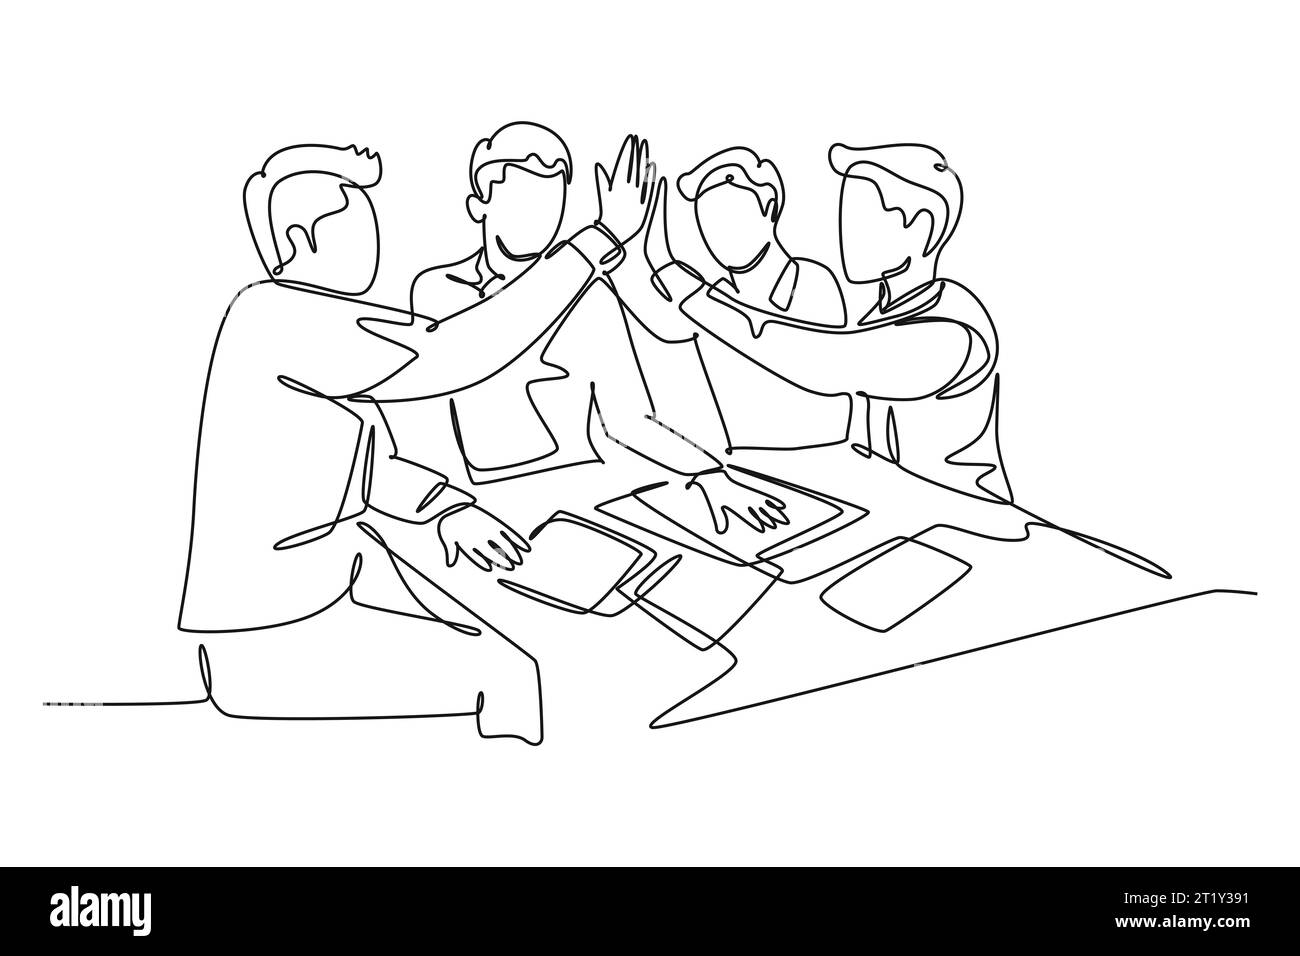 Single continuous line drawing of young businessmen and businesswomen celebrating their successive goal at the business meeting with high five gesture Stock Photo